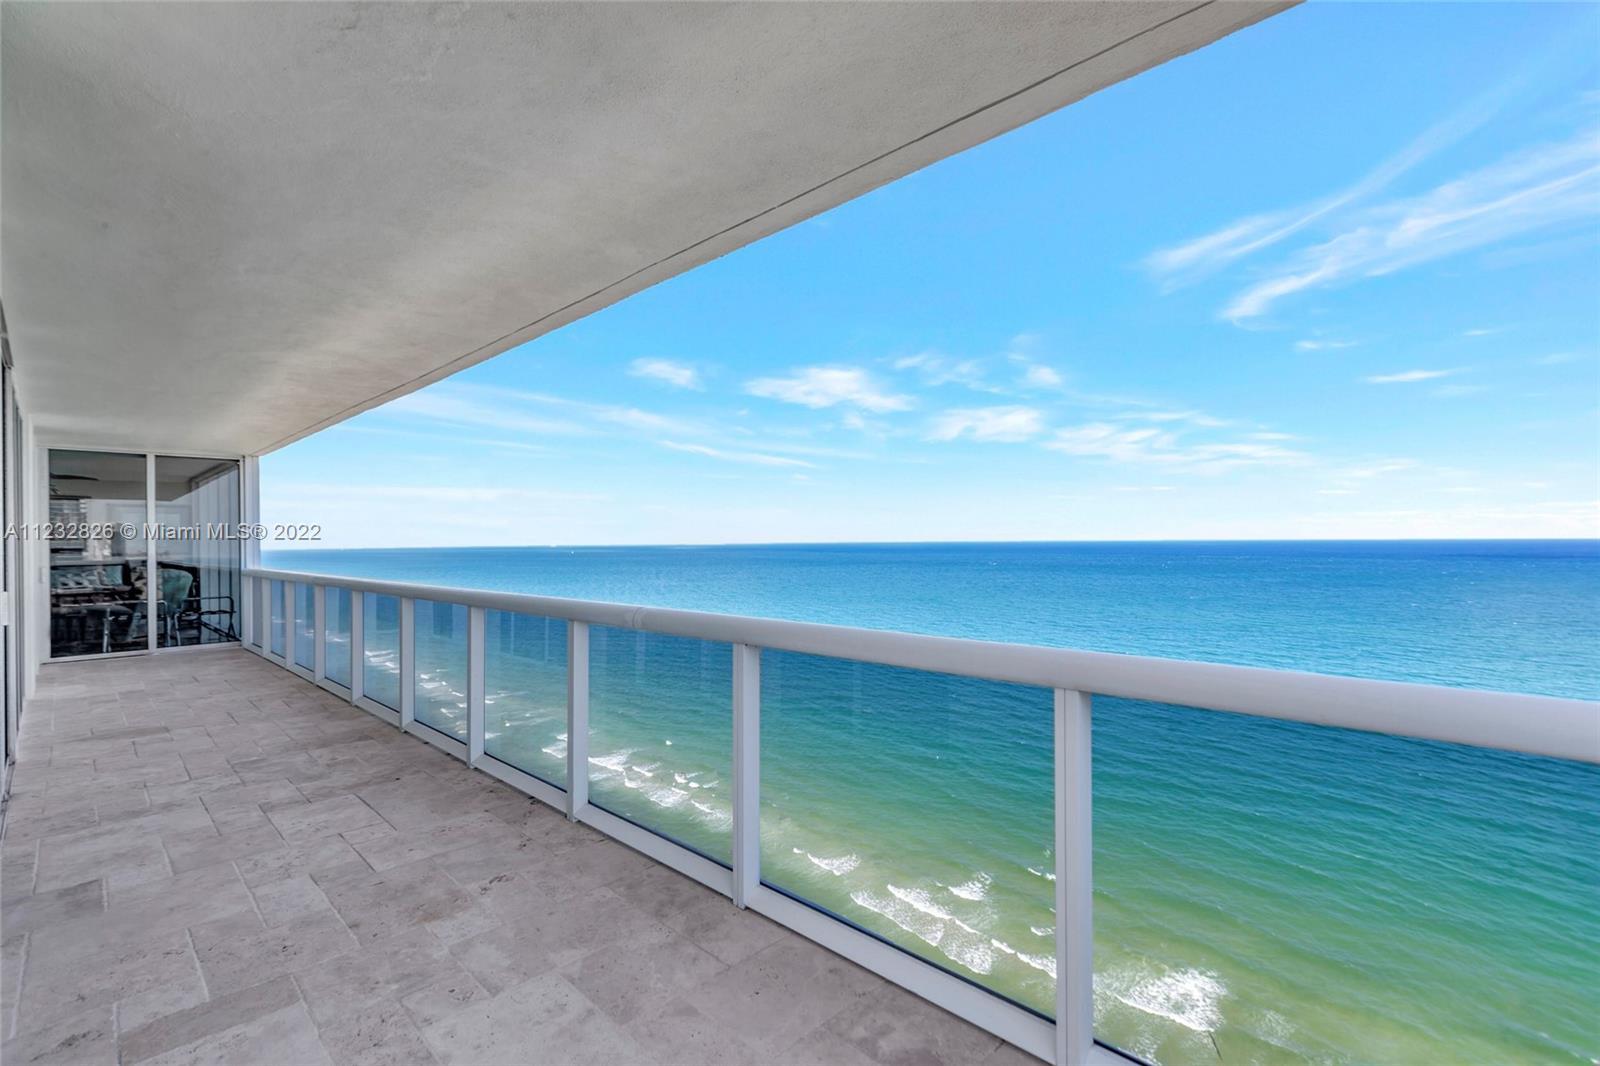 Amazing opportunity to own a piece of paradise in the sky! Enjoy unobstructed oceanfront views from 